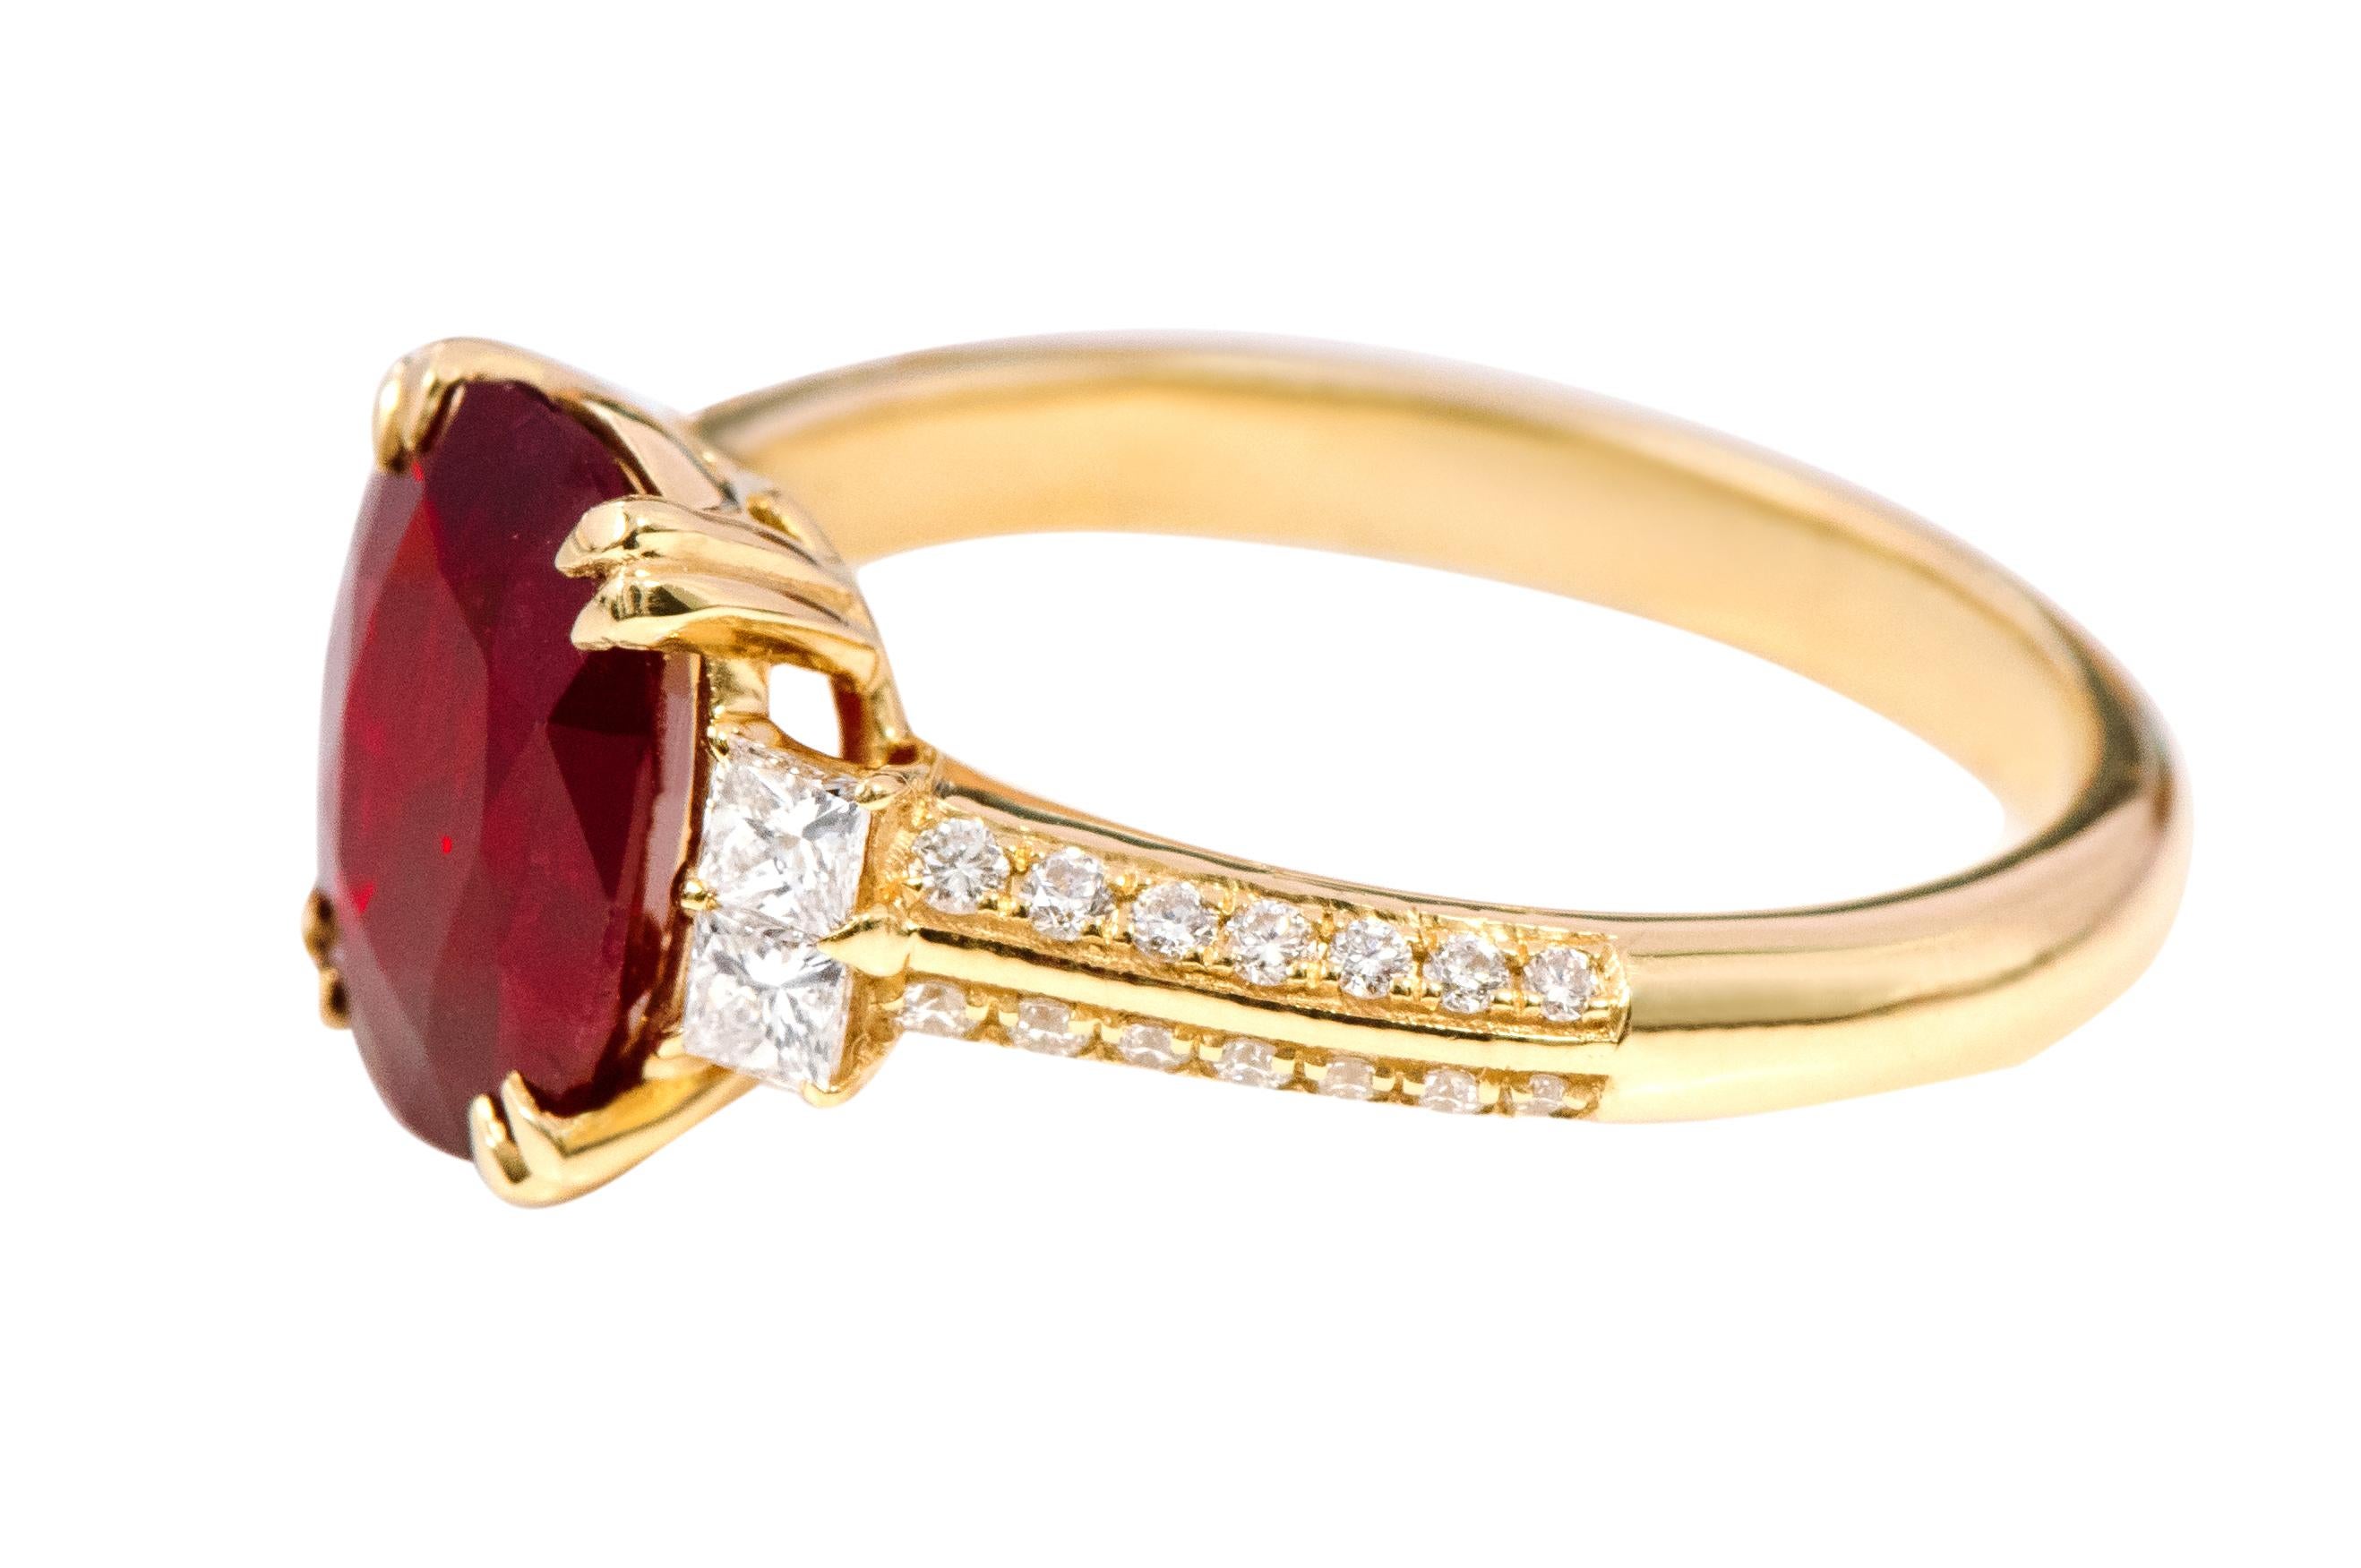 18 Karat Yellow Gold 2.70 Carat Oval-Cut Ruby and Diamond Solitaire Ring

This glorious wine red ruby and diamond ring is sensational. The conceptual three-stone trinity ring tells a story by not only representing the said “past, present, and